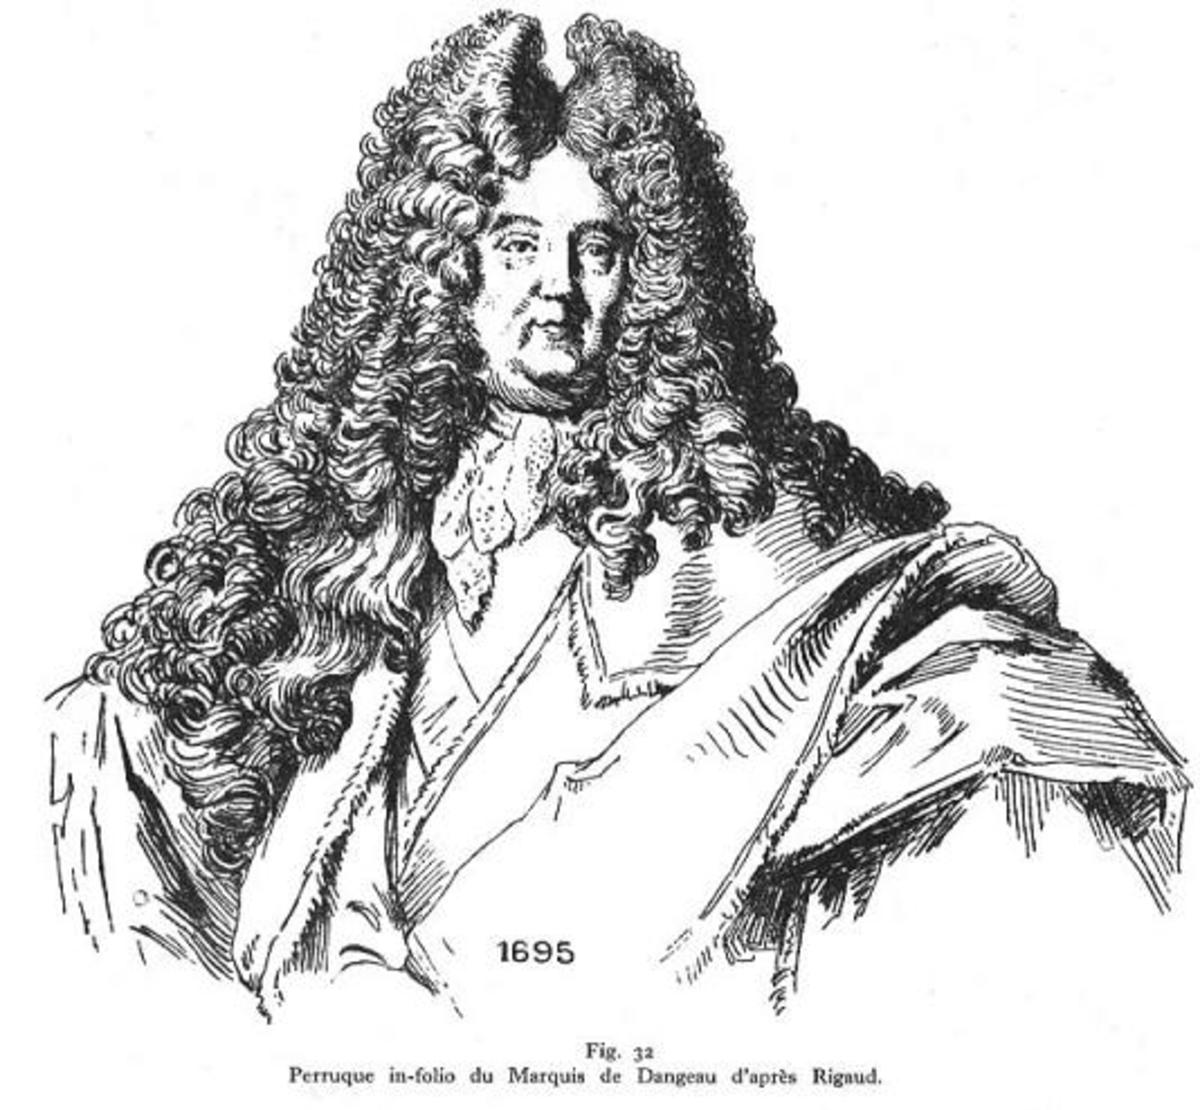 Hairstyles of the British Court: Whigs in Wigs